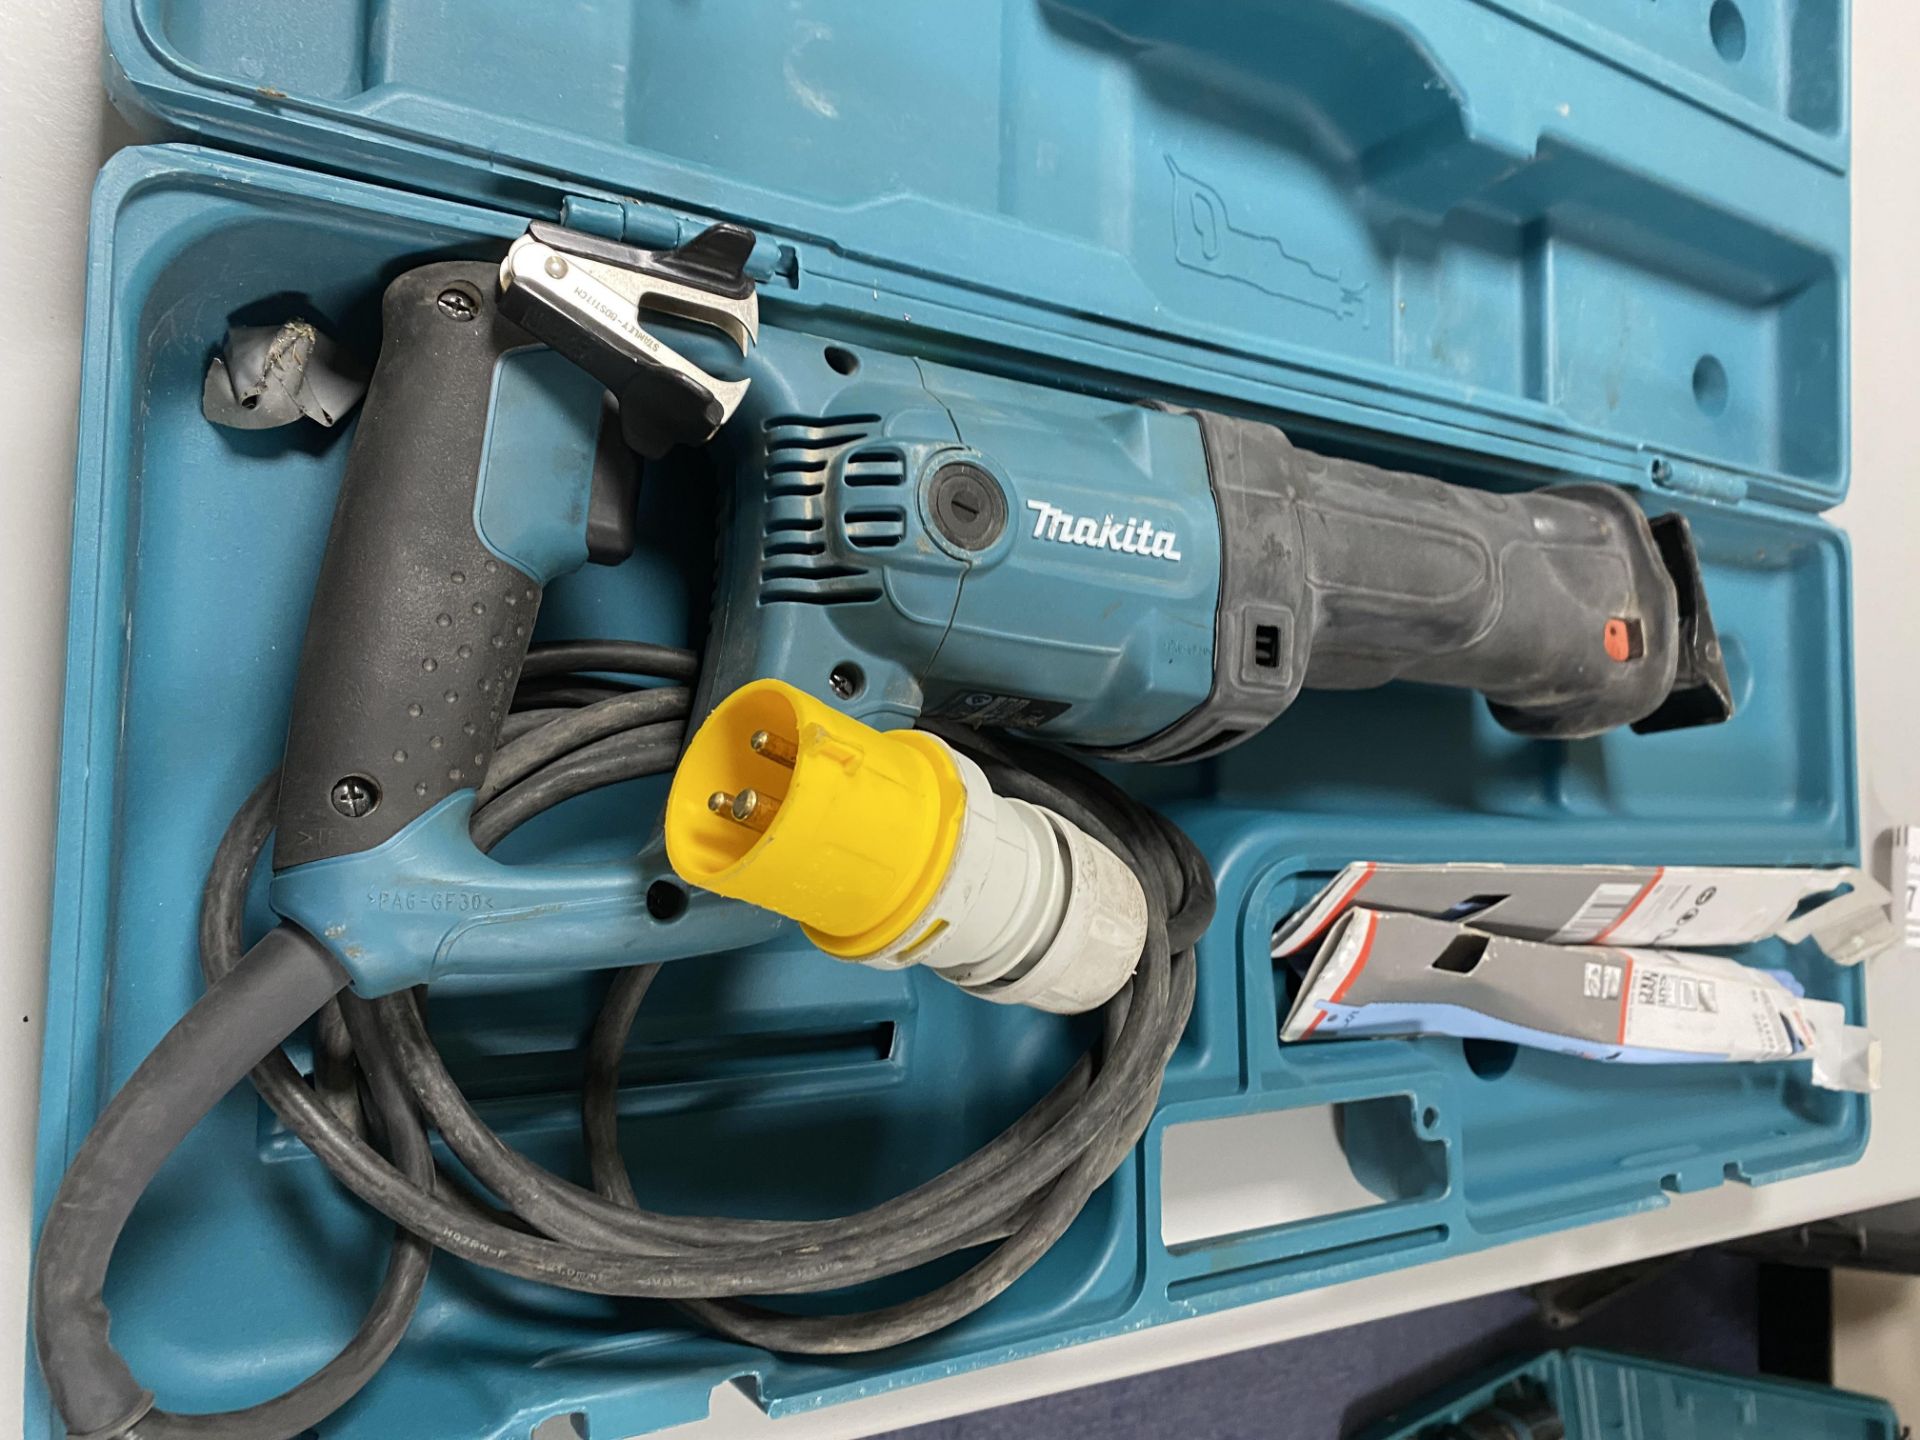 Makita JR3050T 110v Reciprocating Saw with assorted blades and Carry Case as Shown - Image 2 of 7